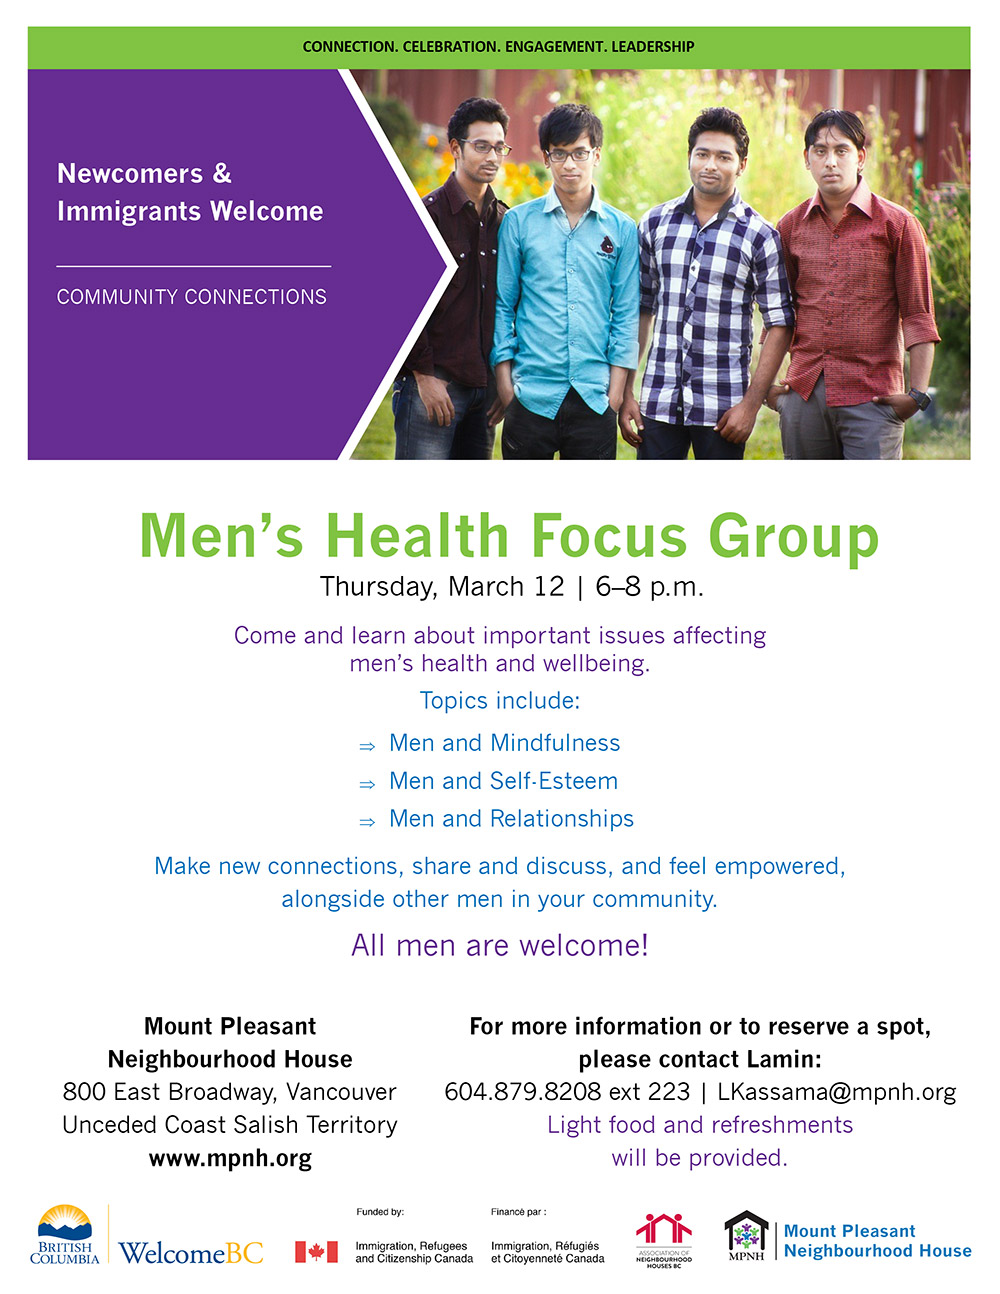 Poster for Men's Health Focus Group showing a group of young men looking happy together